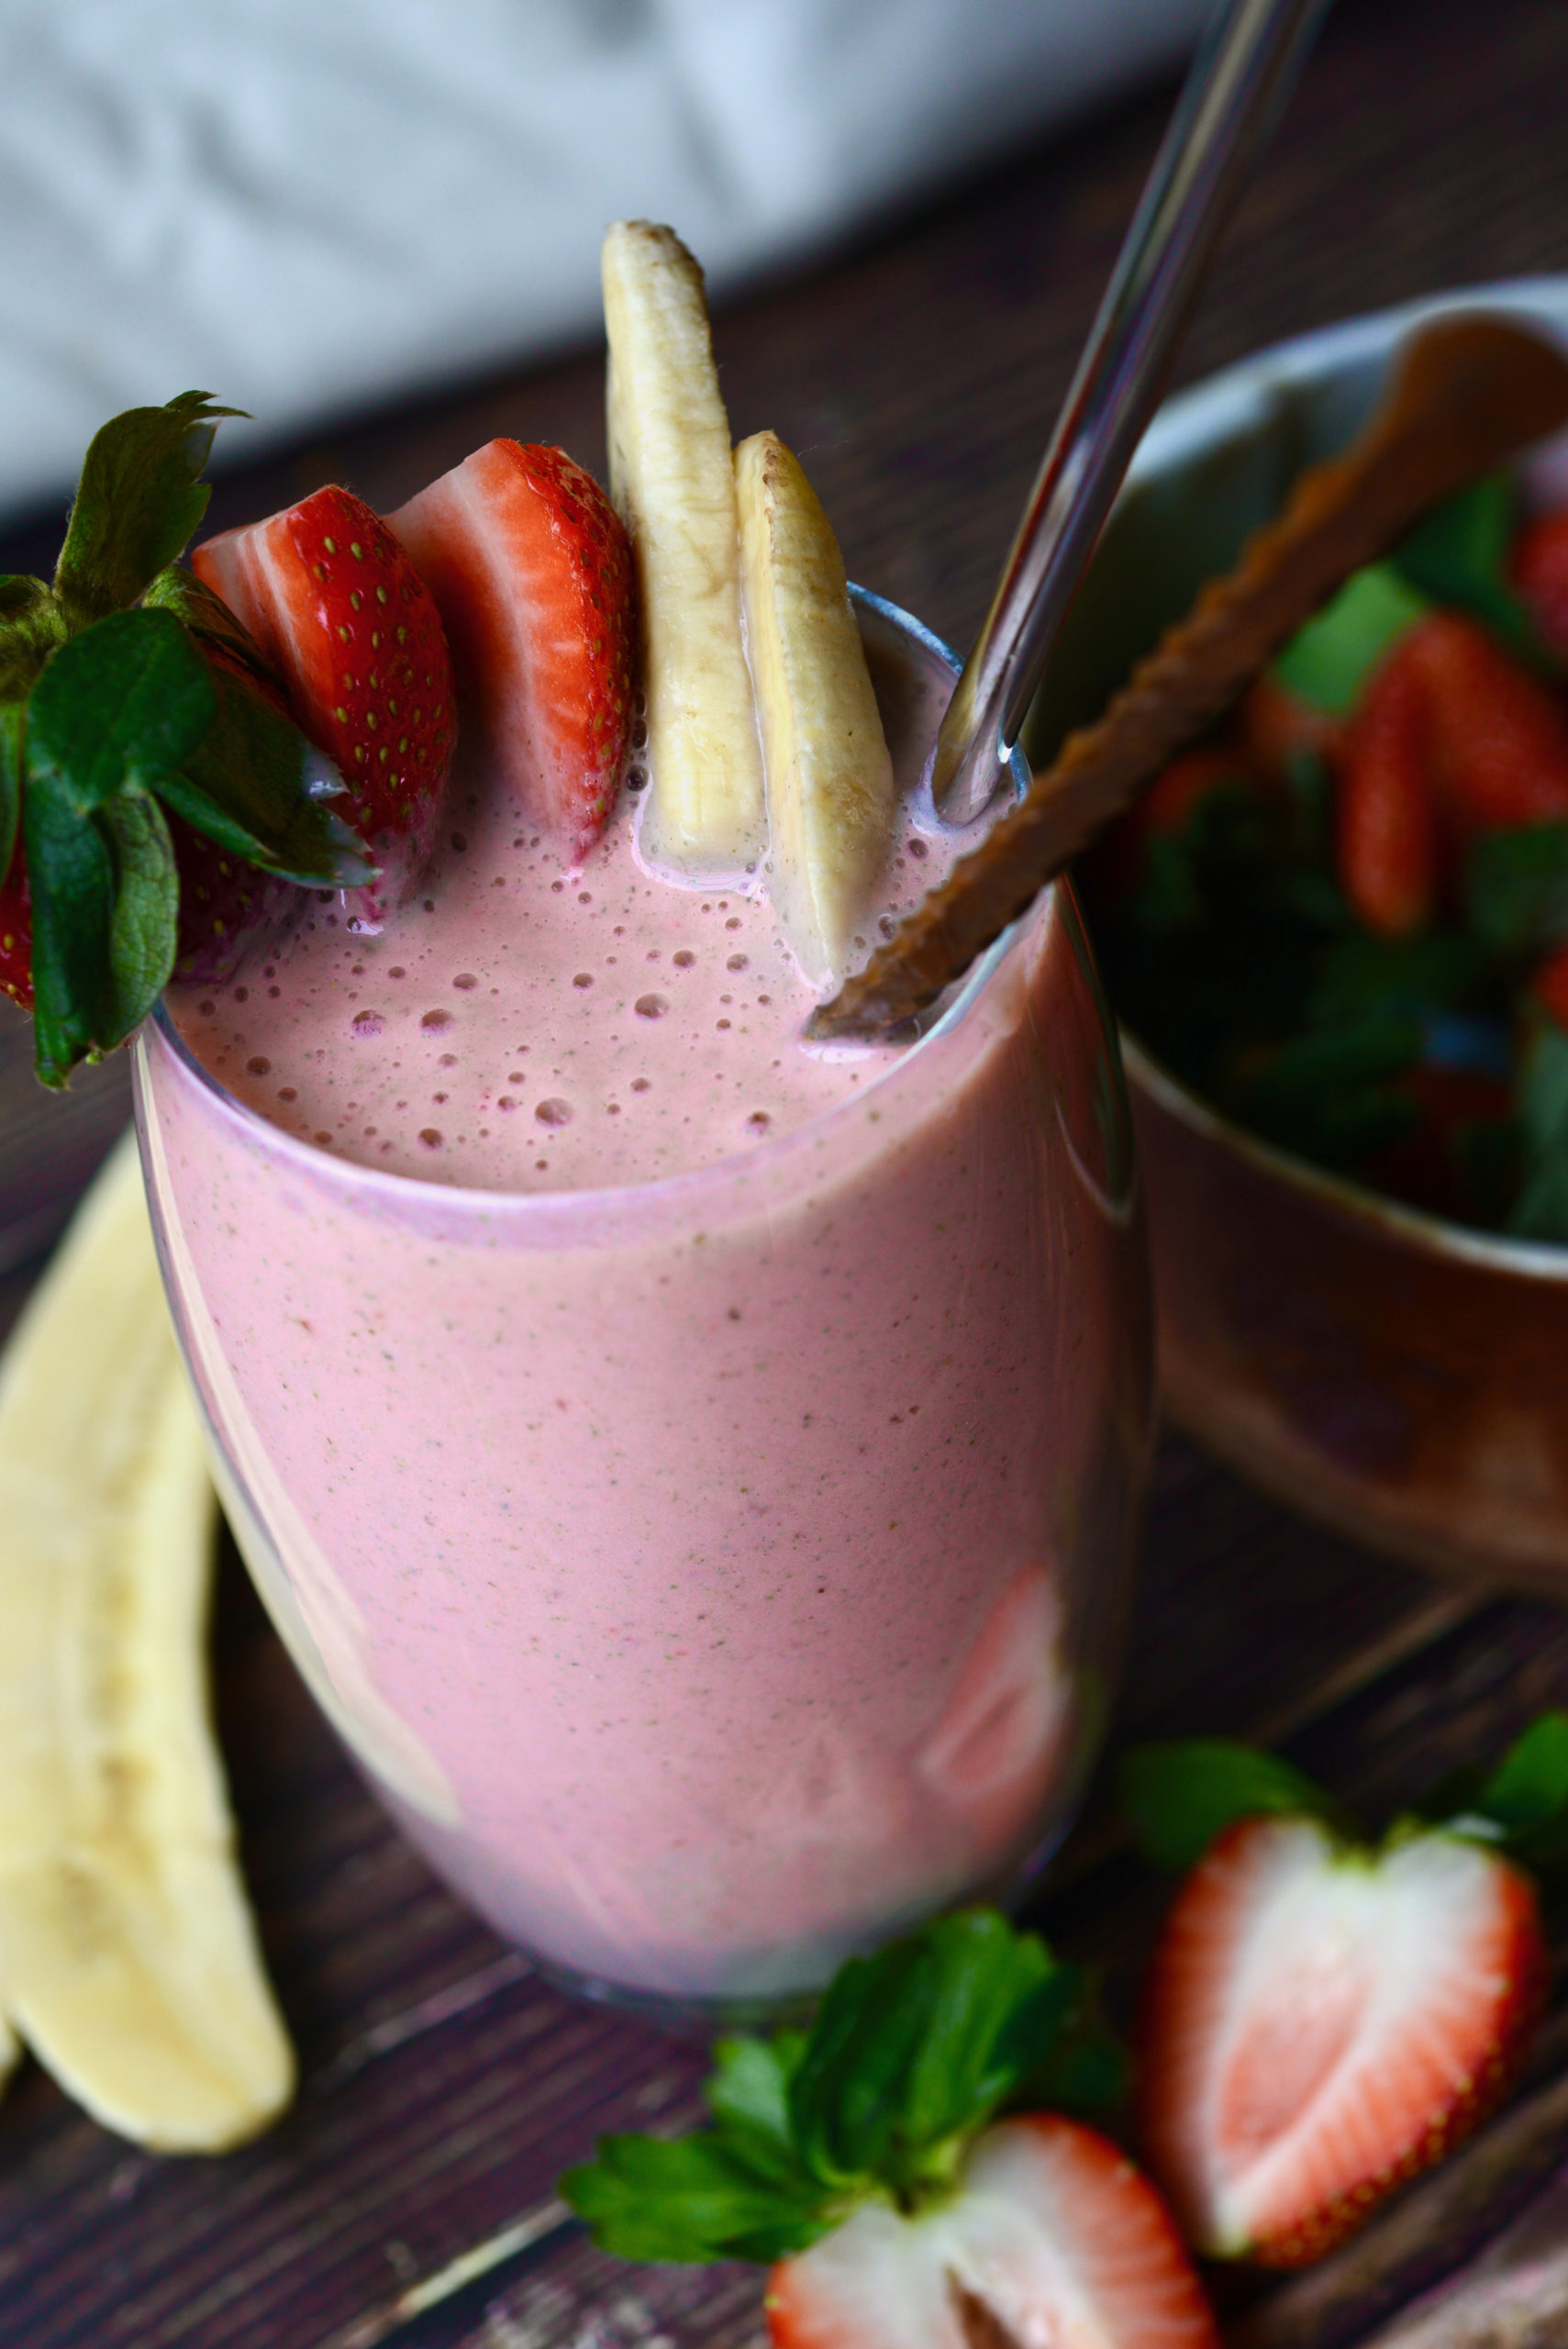 3-ingredient strawberry banana smoothie, angled shot of smoothie in glass with fruit garnishes, straw, and spoon